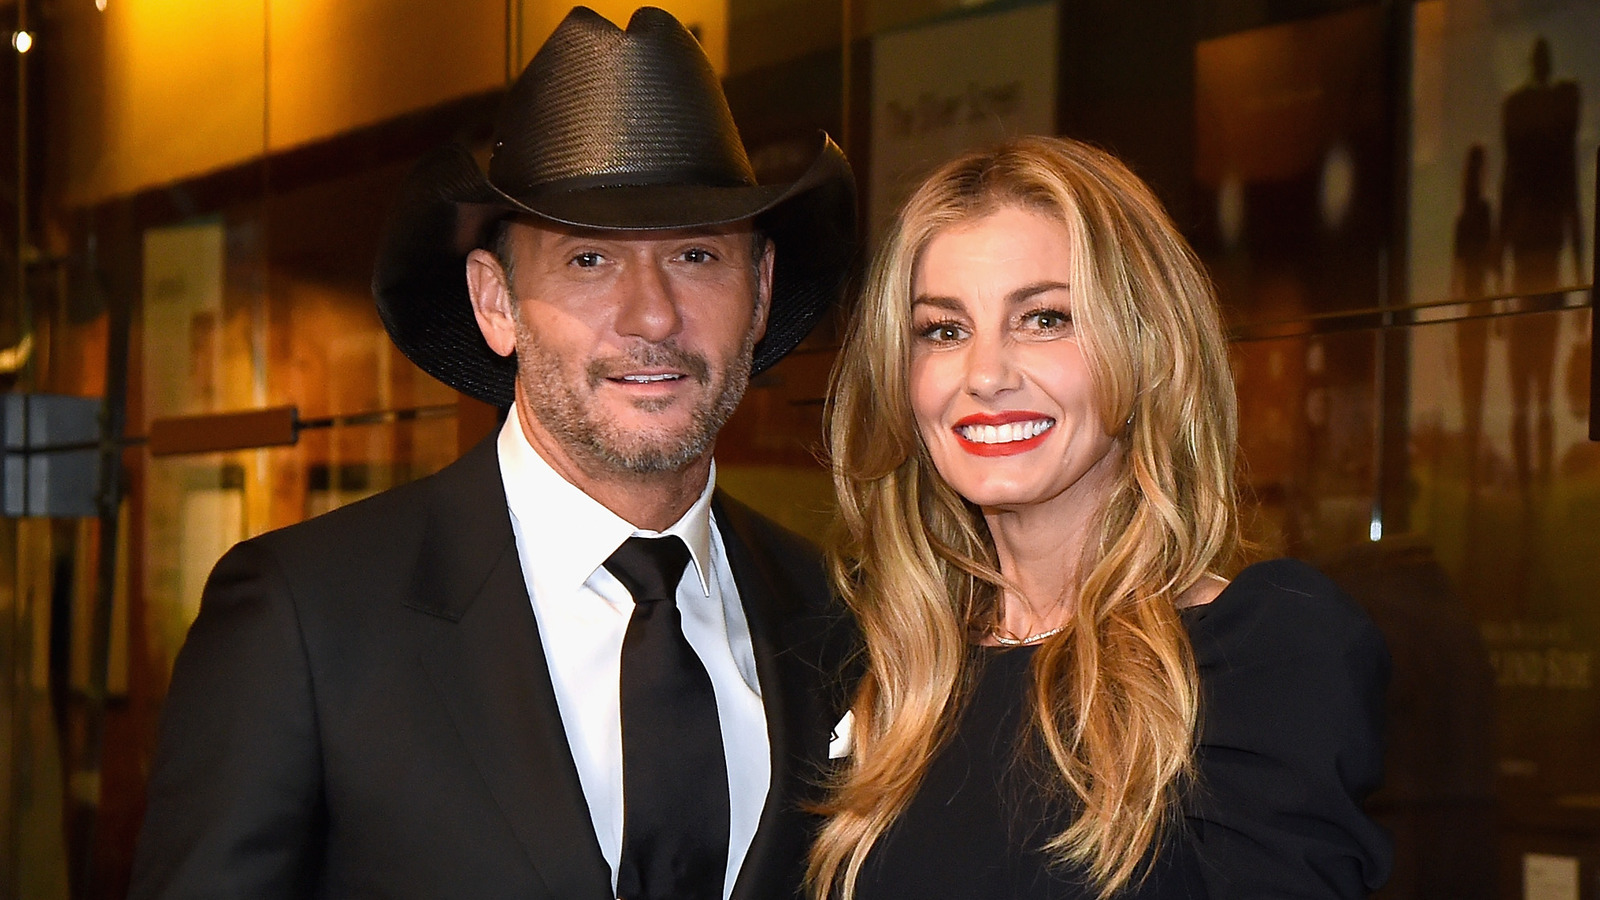 Tim McGraw and Faith Hill: Who is Worth More?